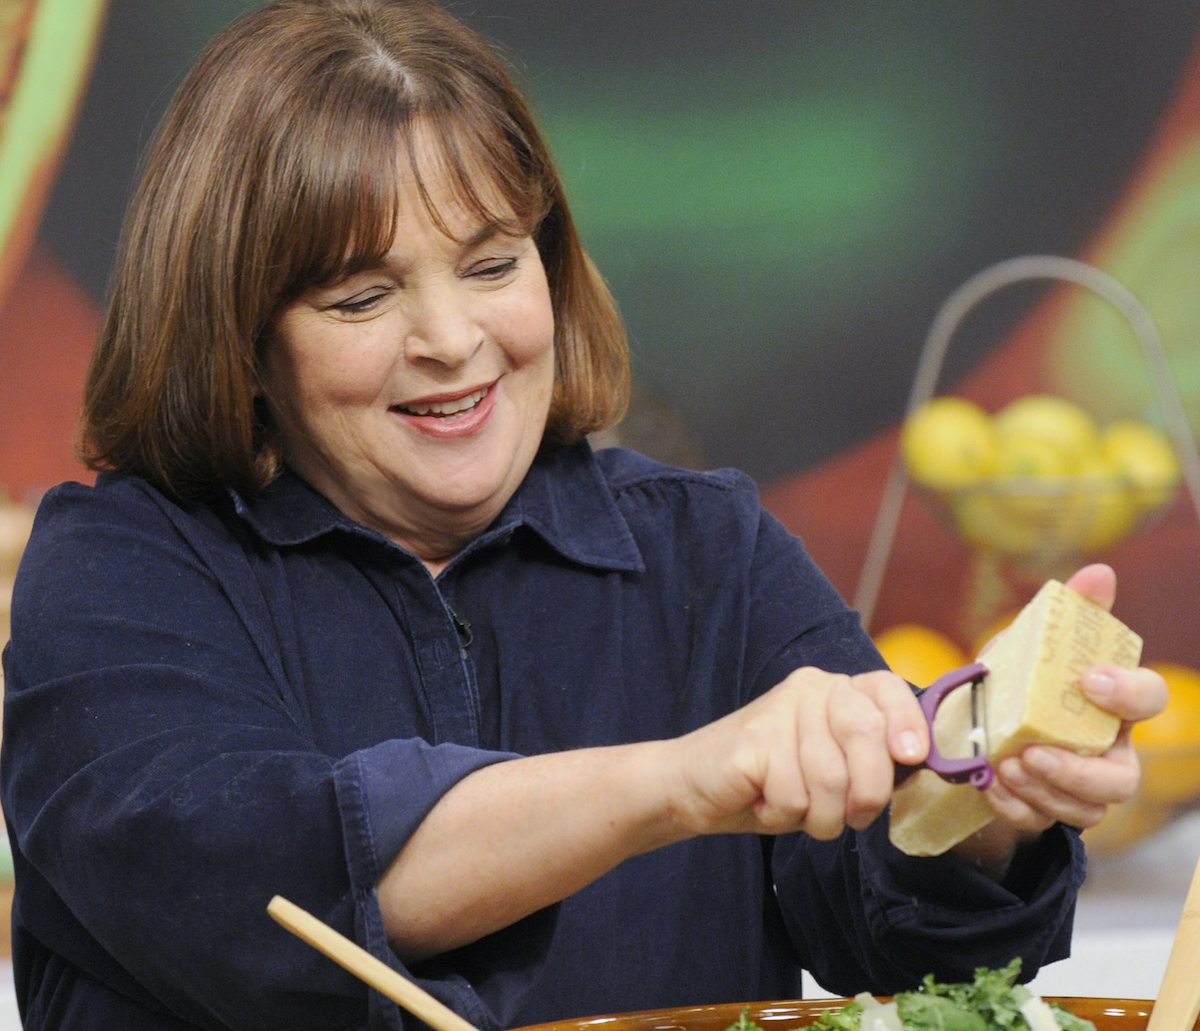 Ina Garten, who addressed critics calling her food 'too heavy', does a cooking demonstration on 'The Chew'